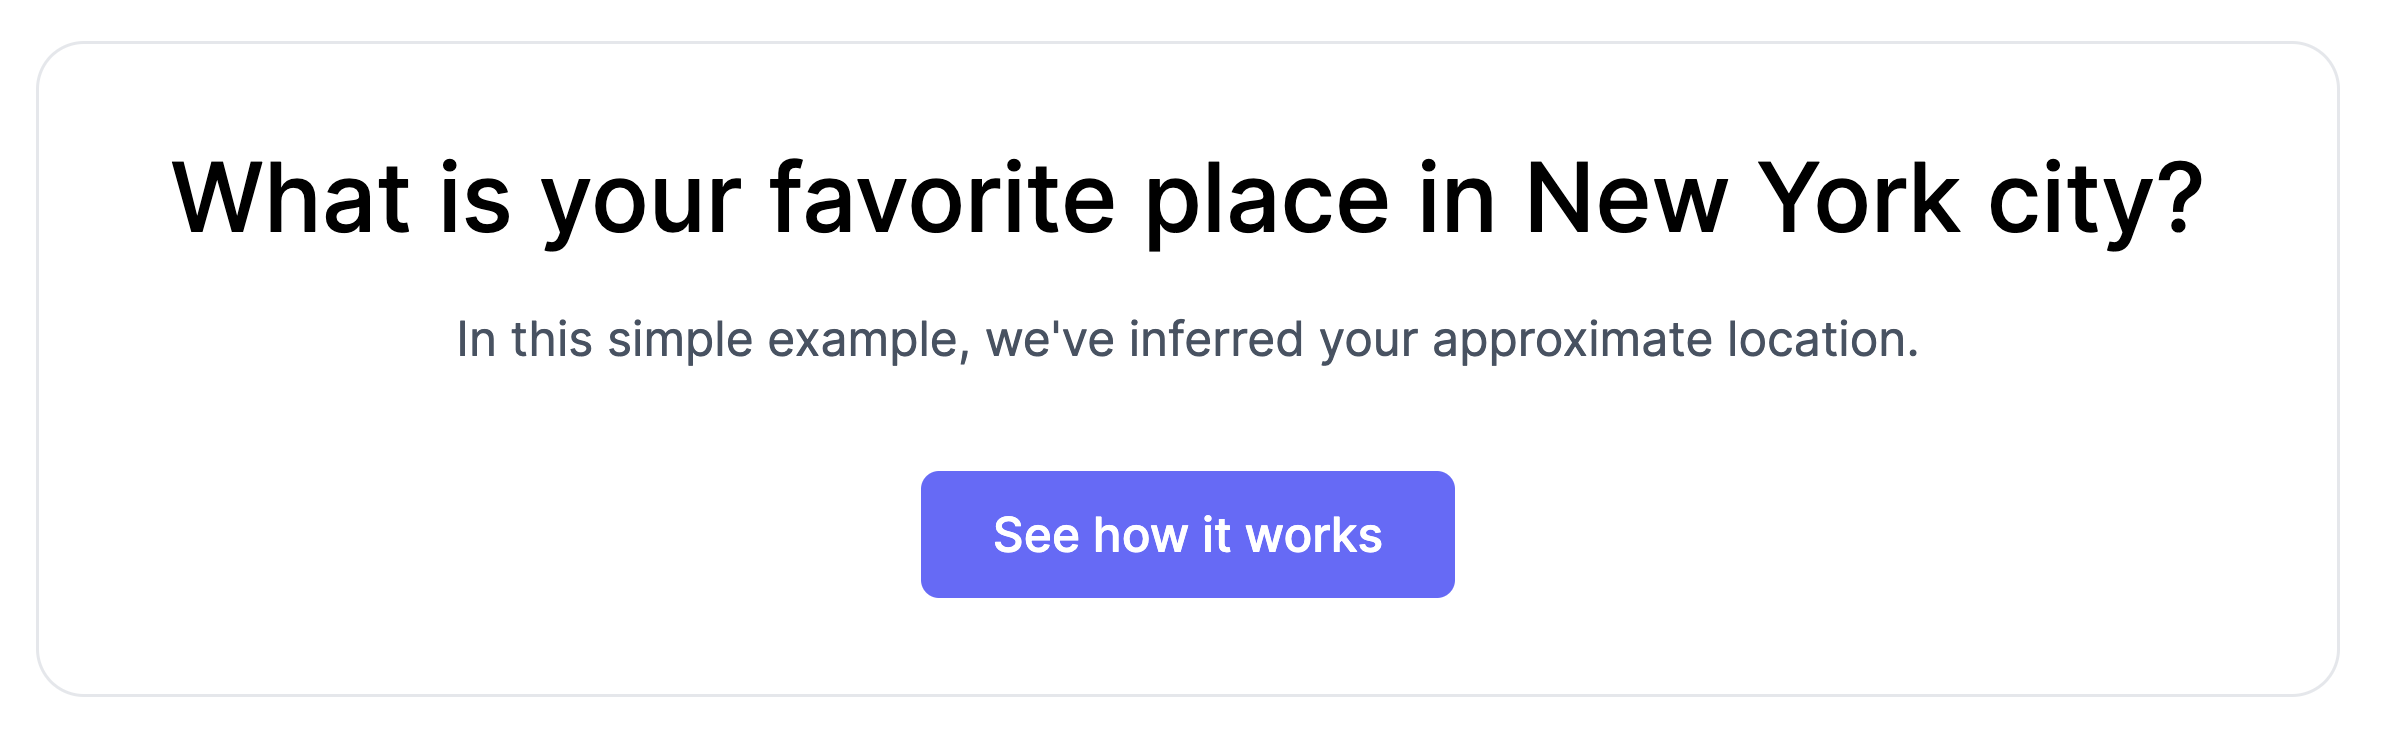 Example of personalized image asking visitors what is their favorite place in New York city. Location API was used to segment users from New York.